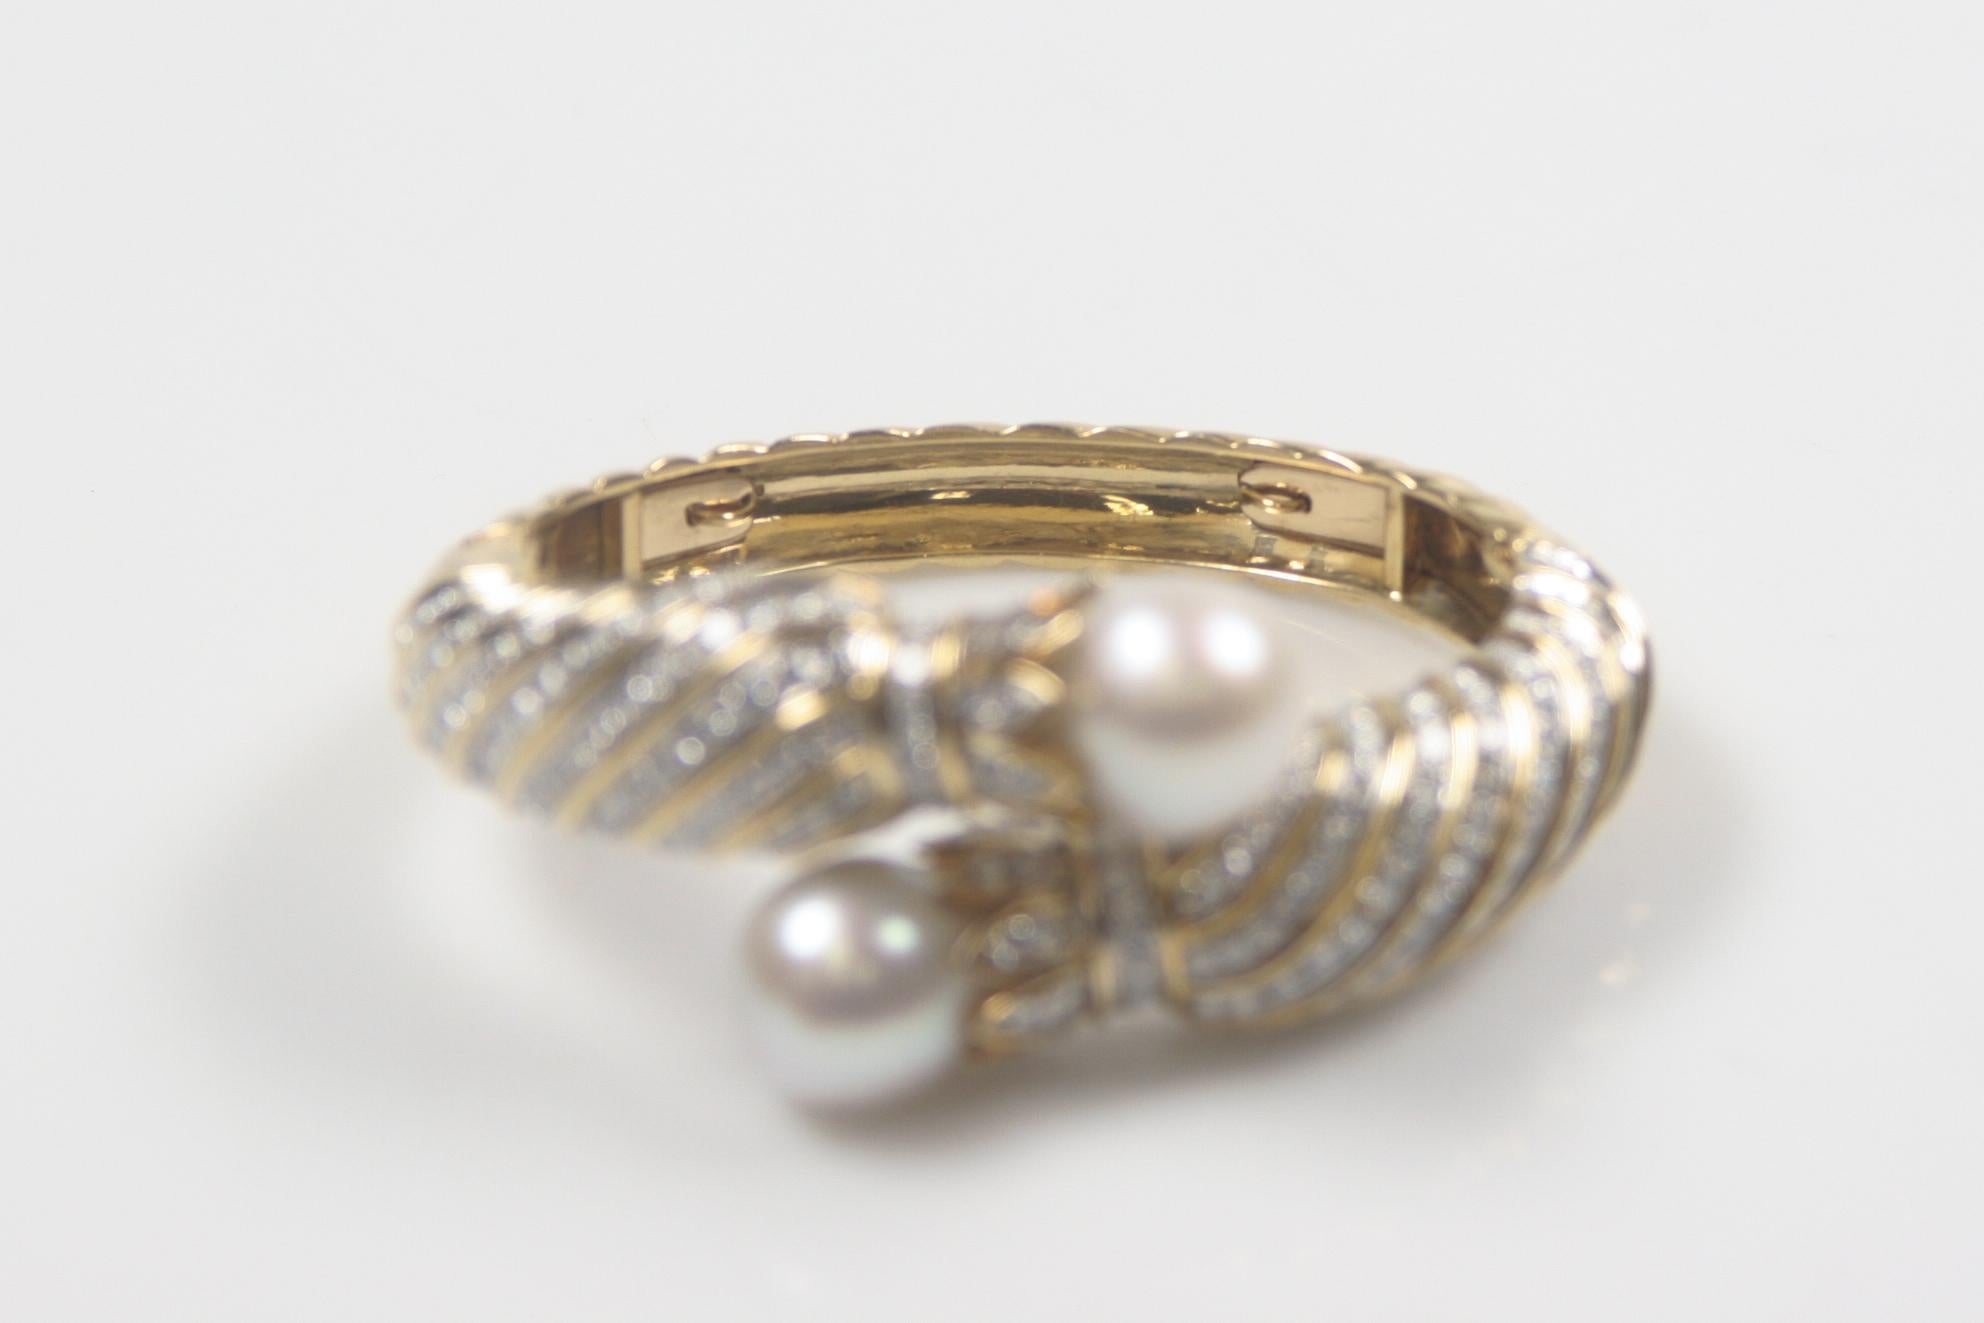 Gorgeous Double-Hinged 18k Yellow Gold Diamond & South Sea Pearl Bangle
Features 248 Round Brilliant Pavé-Set Diamonds in Spiral Pattern
Total Diamond Weight = 10.00 carats
Average Clarity = VS
Average Color = G - H
Culminates in two South Sea